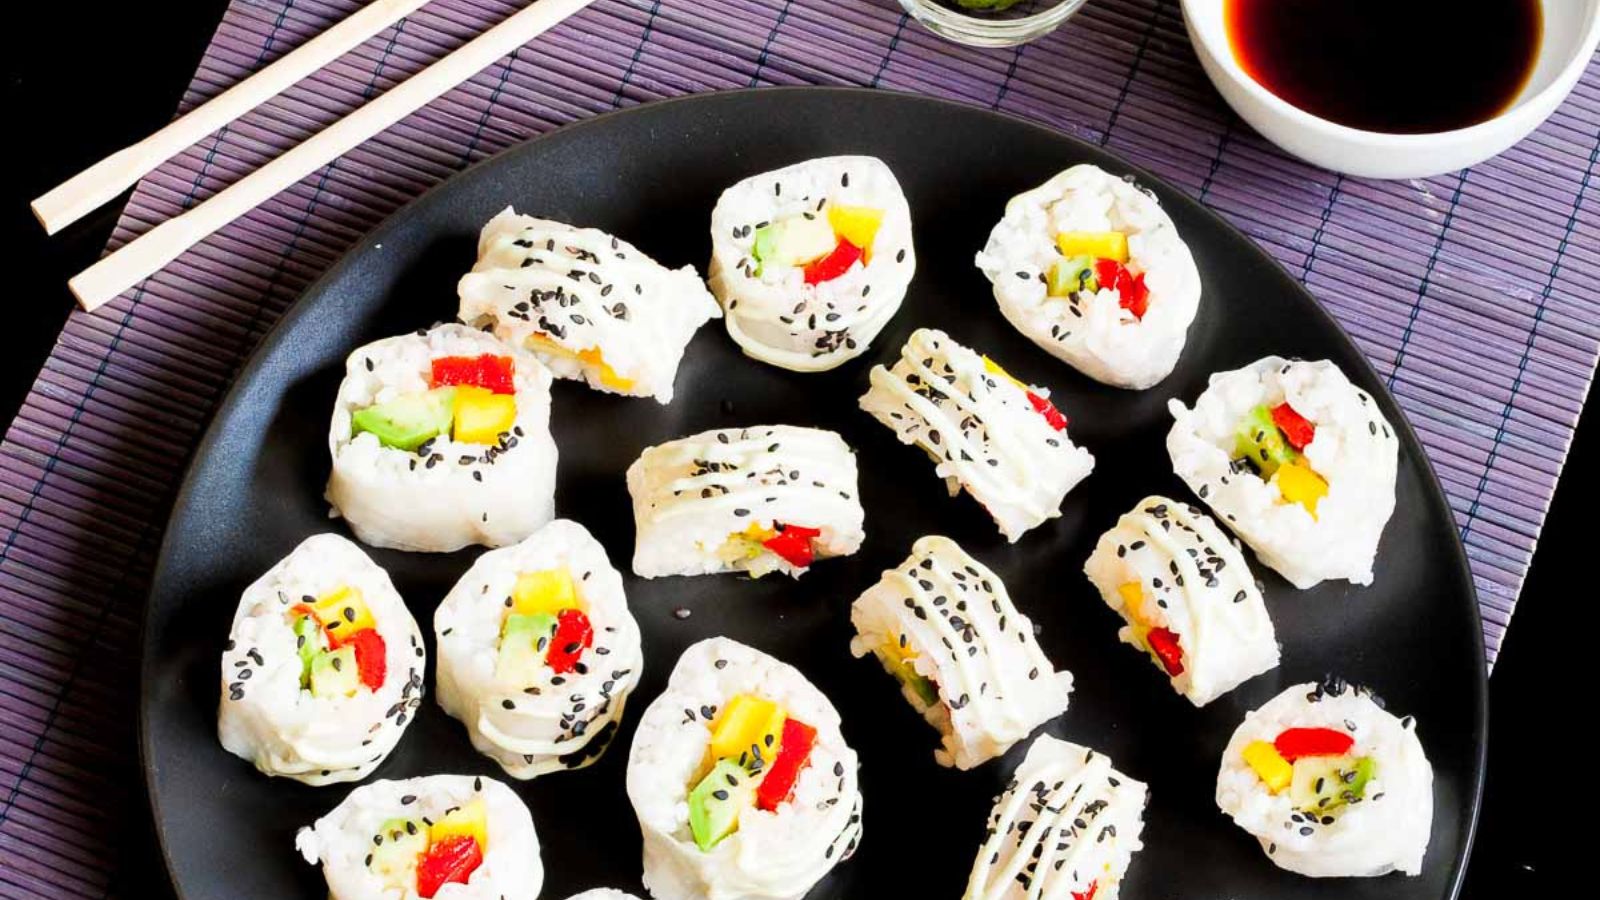 <p>These rice paper sushi rolls are a delicious and refreshing alternative to traditional sushi, filled with a combination of sweet mango, creamy avocado, and roasted red pepper, and served with a zesty wasabi mayo. Perfect for a light lunch or snack!</p><p><strong>Recipe: <a href="https://mypureplants.com/rice-paper-sushi-without-seaweed/">rice paper sushi without seaweed</a></strong></p>